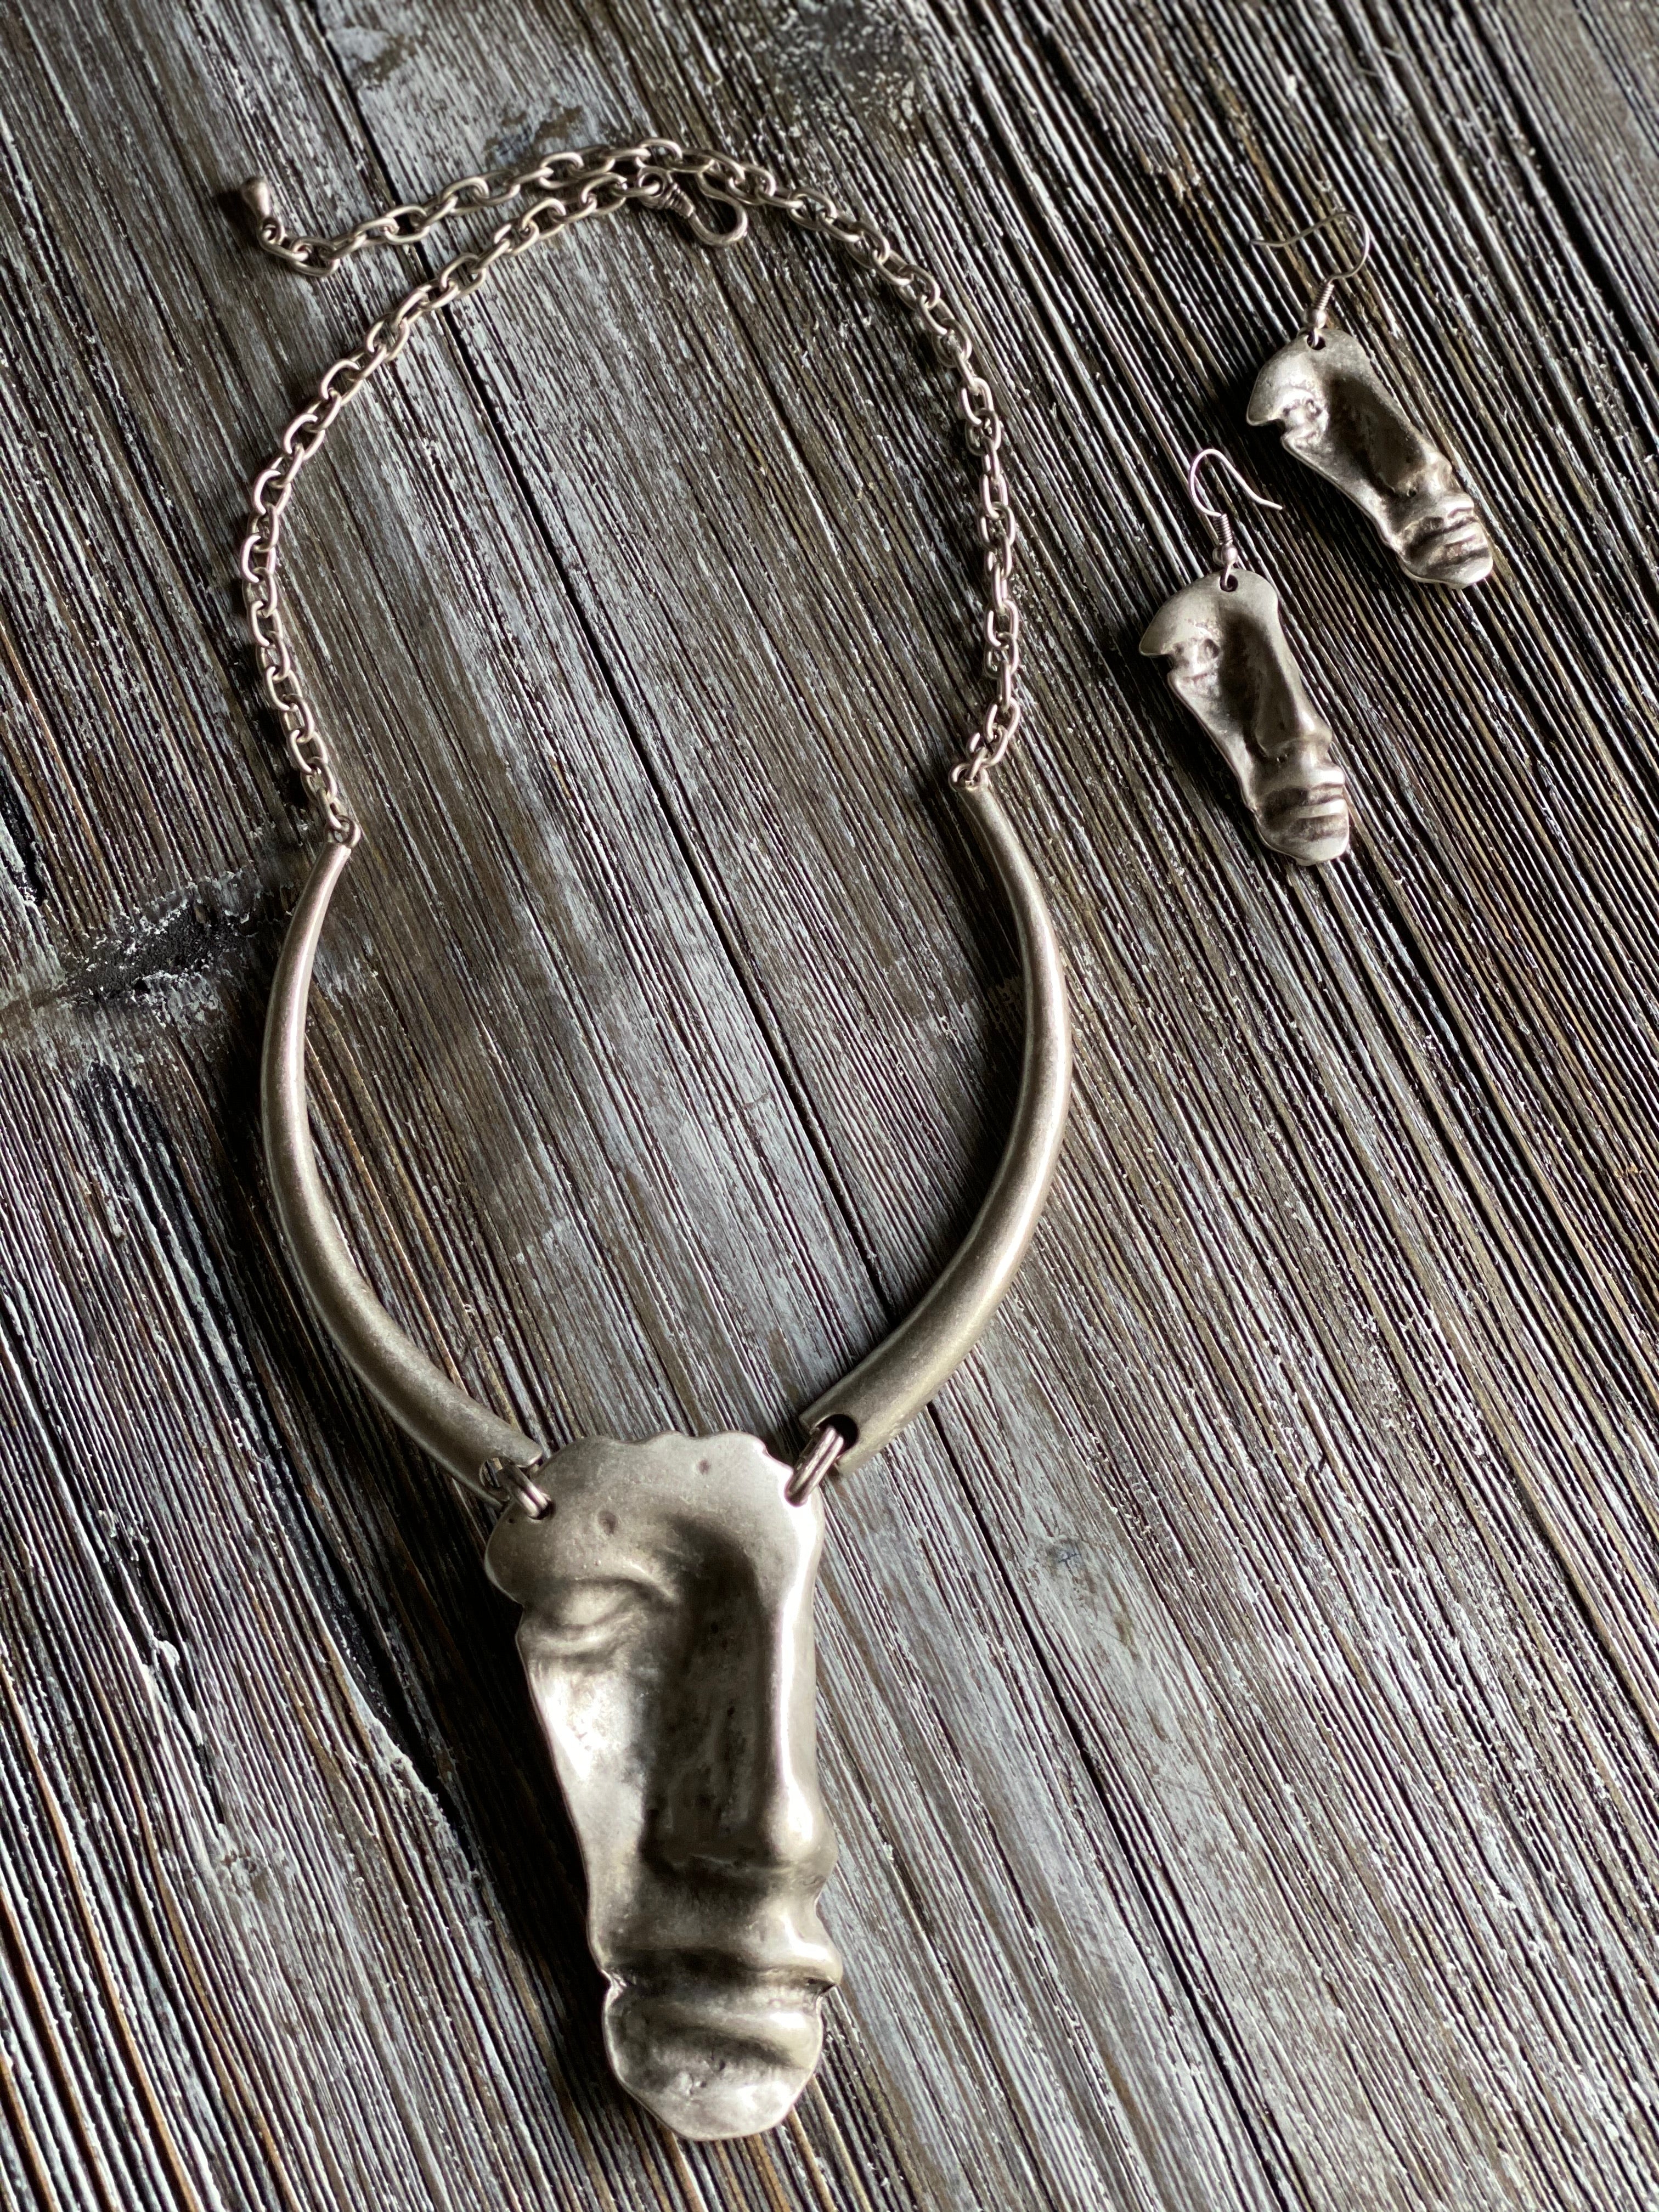 Face Off Necklace and Earrings